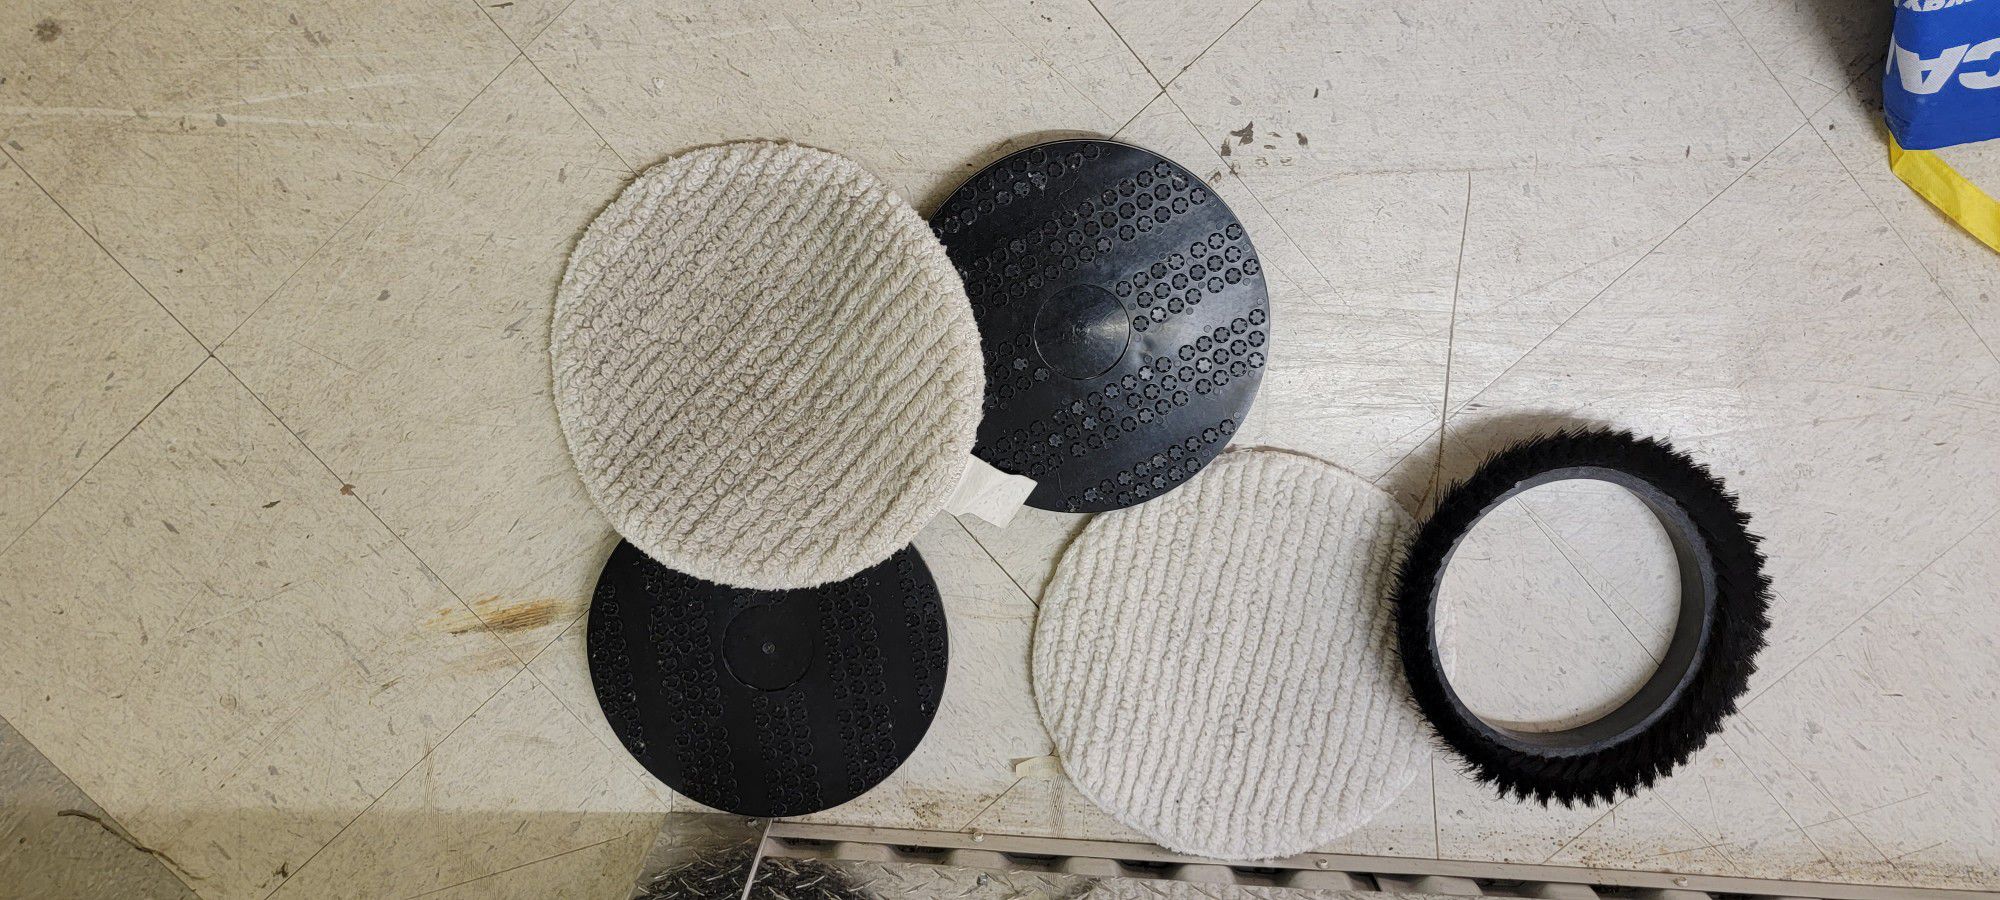 Carpet Scrubber Pad And Disk